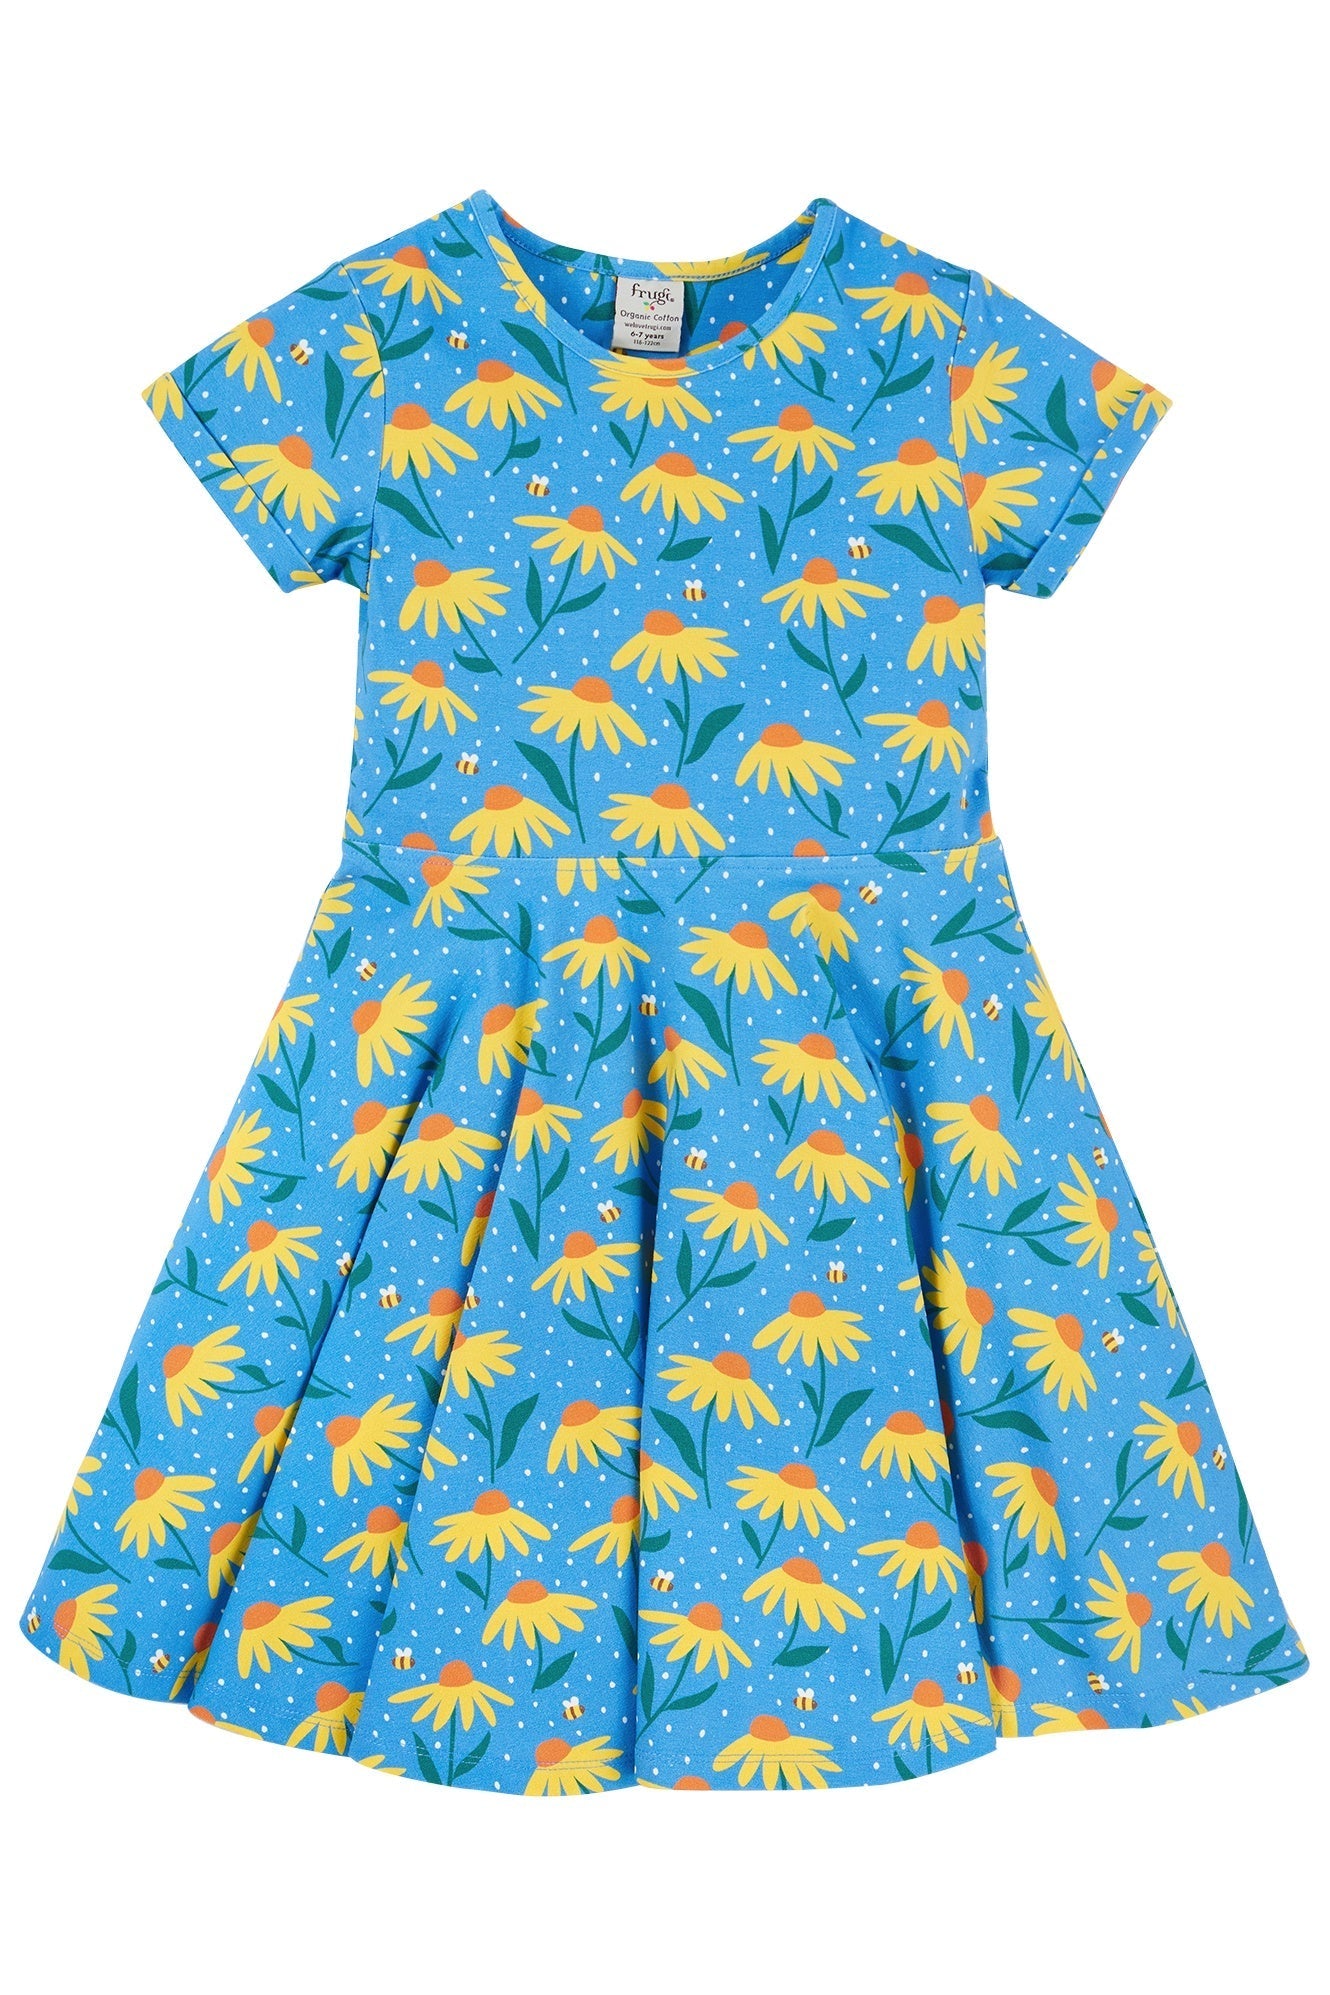 Frugi Spring Skater Dress in Echinacea-Kids-Ohh! By Gum - Shop Sustainable